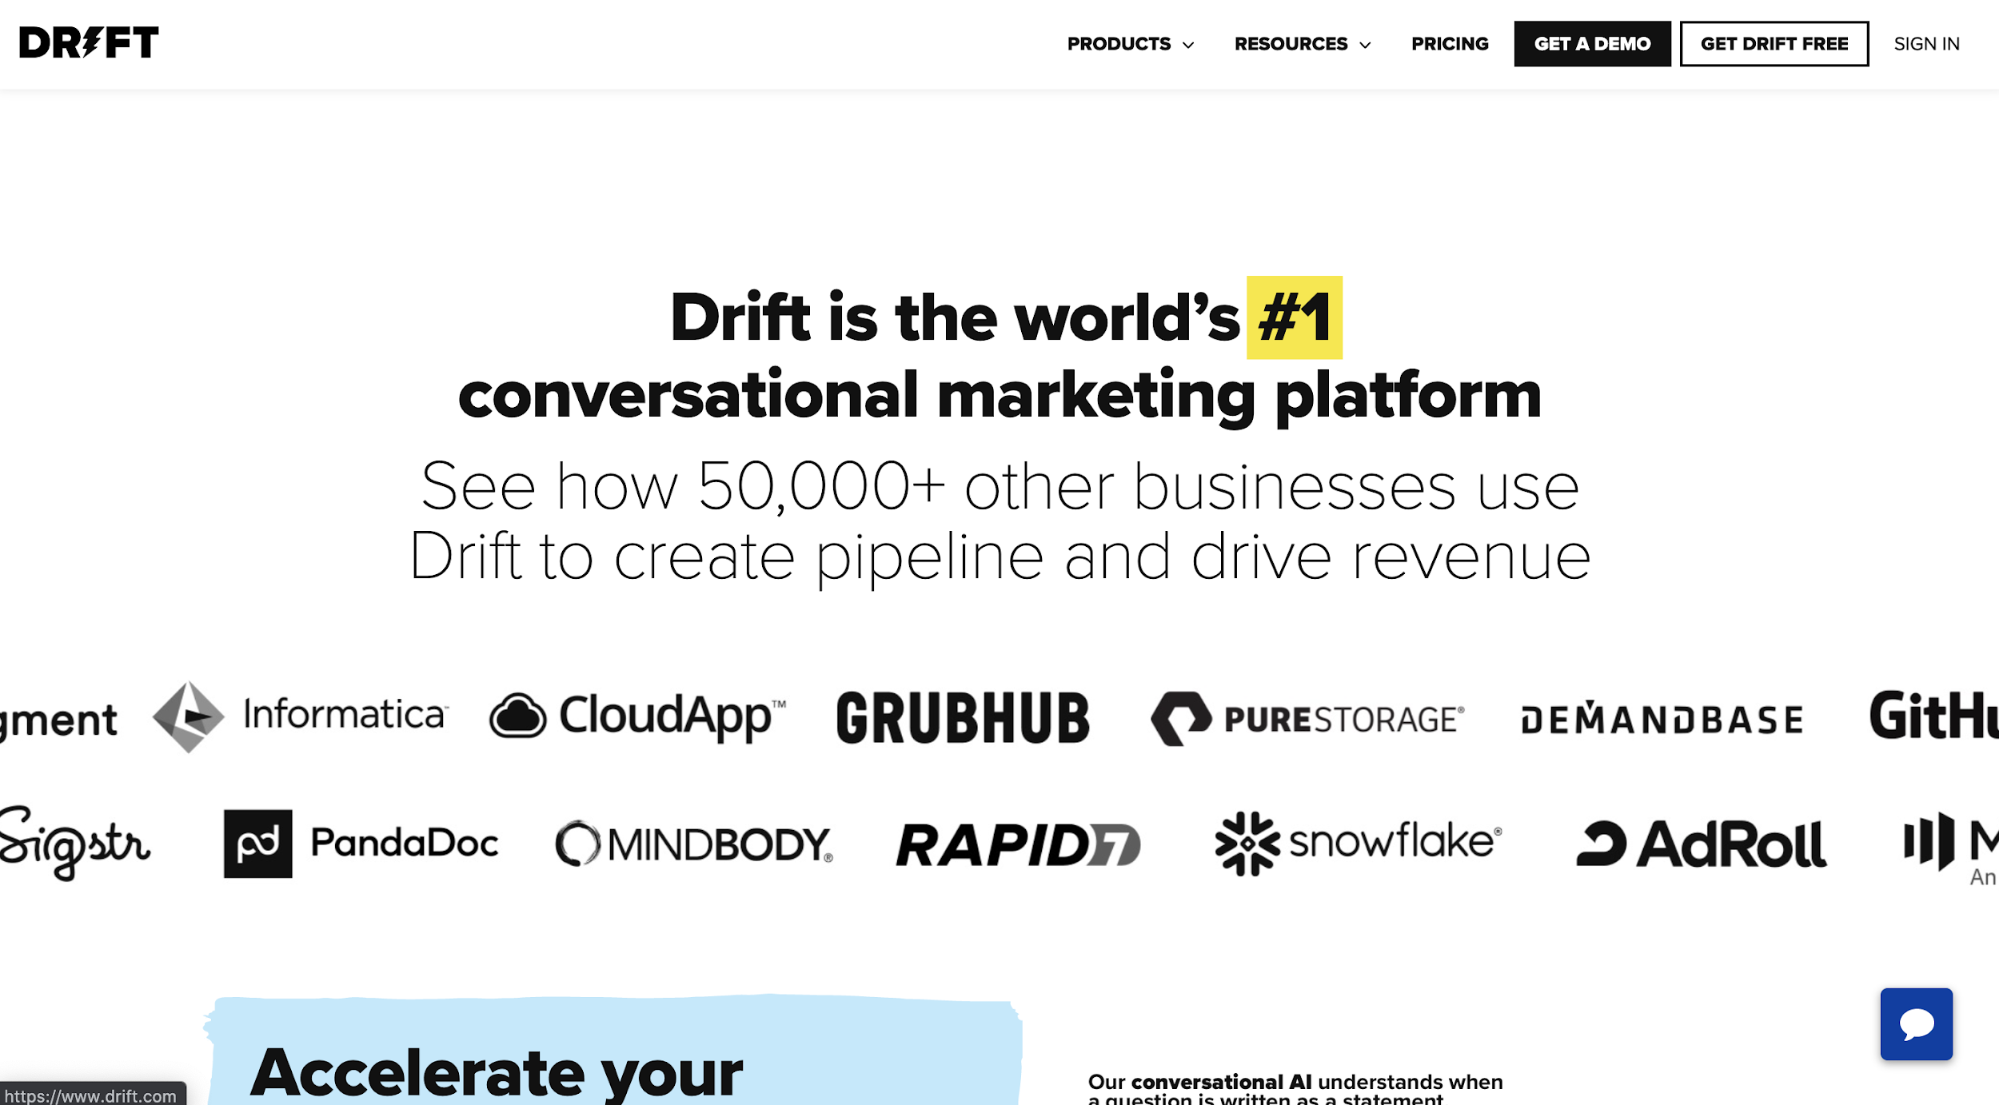 Message on the Drift homepage boasting about their position in their category.